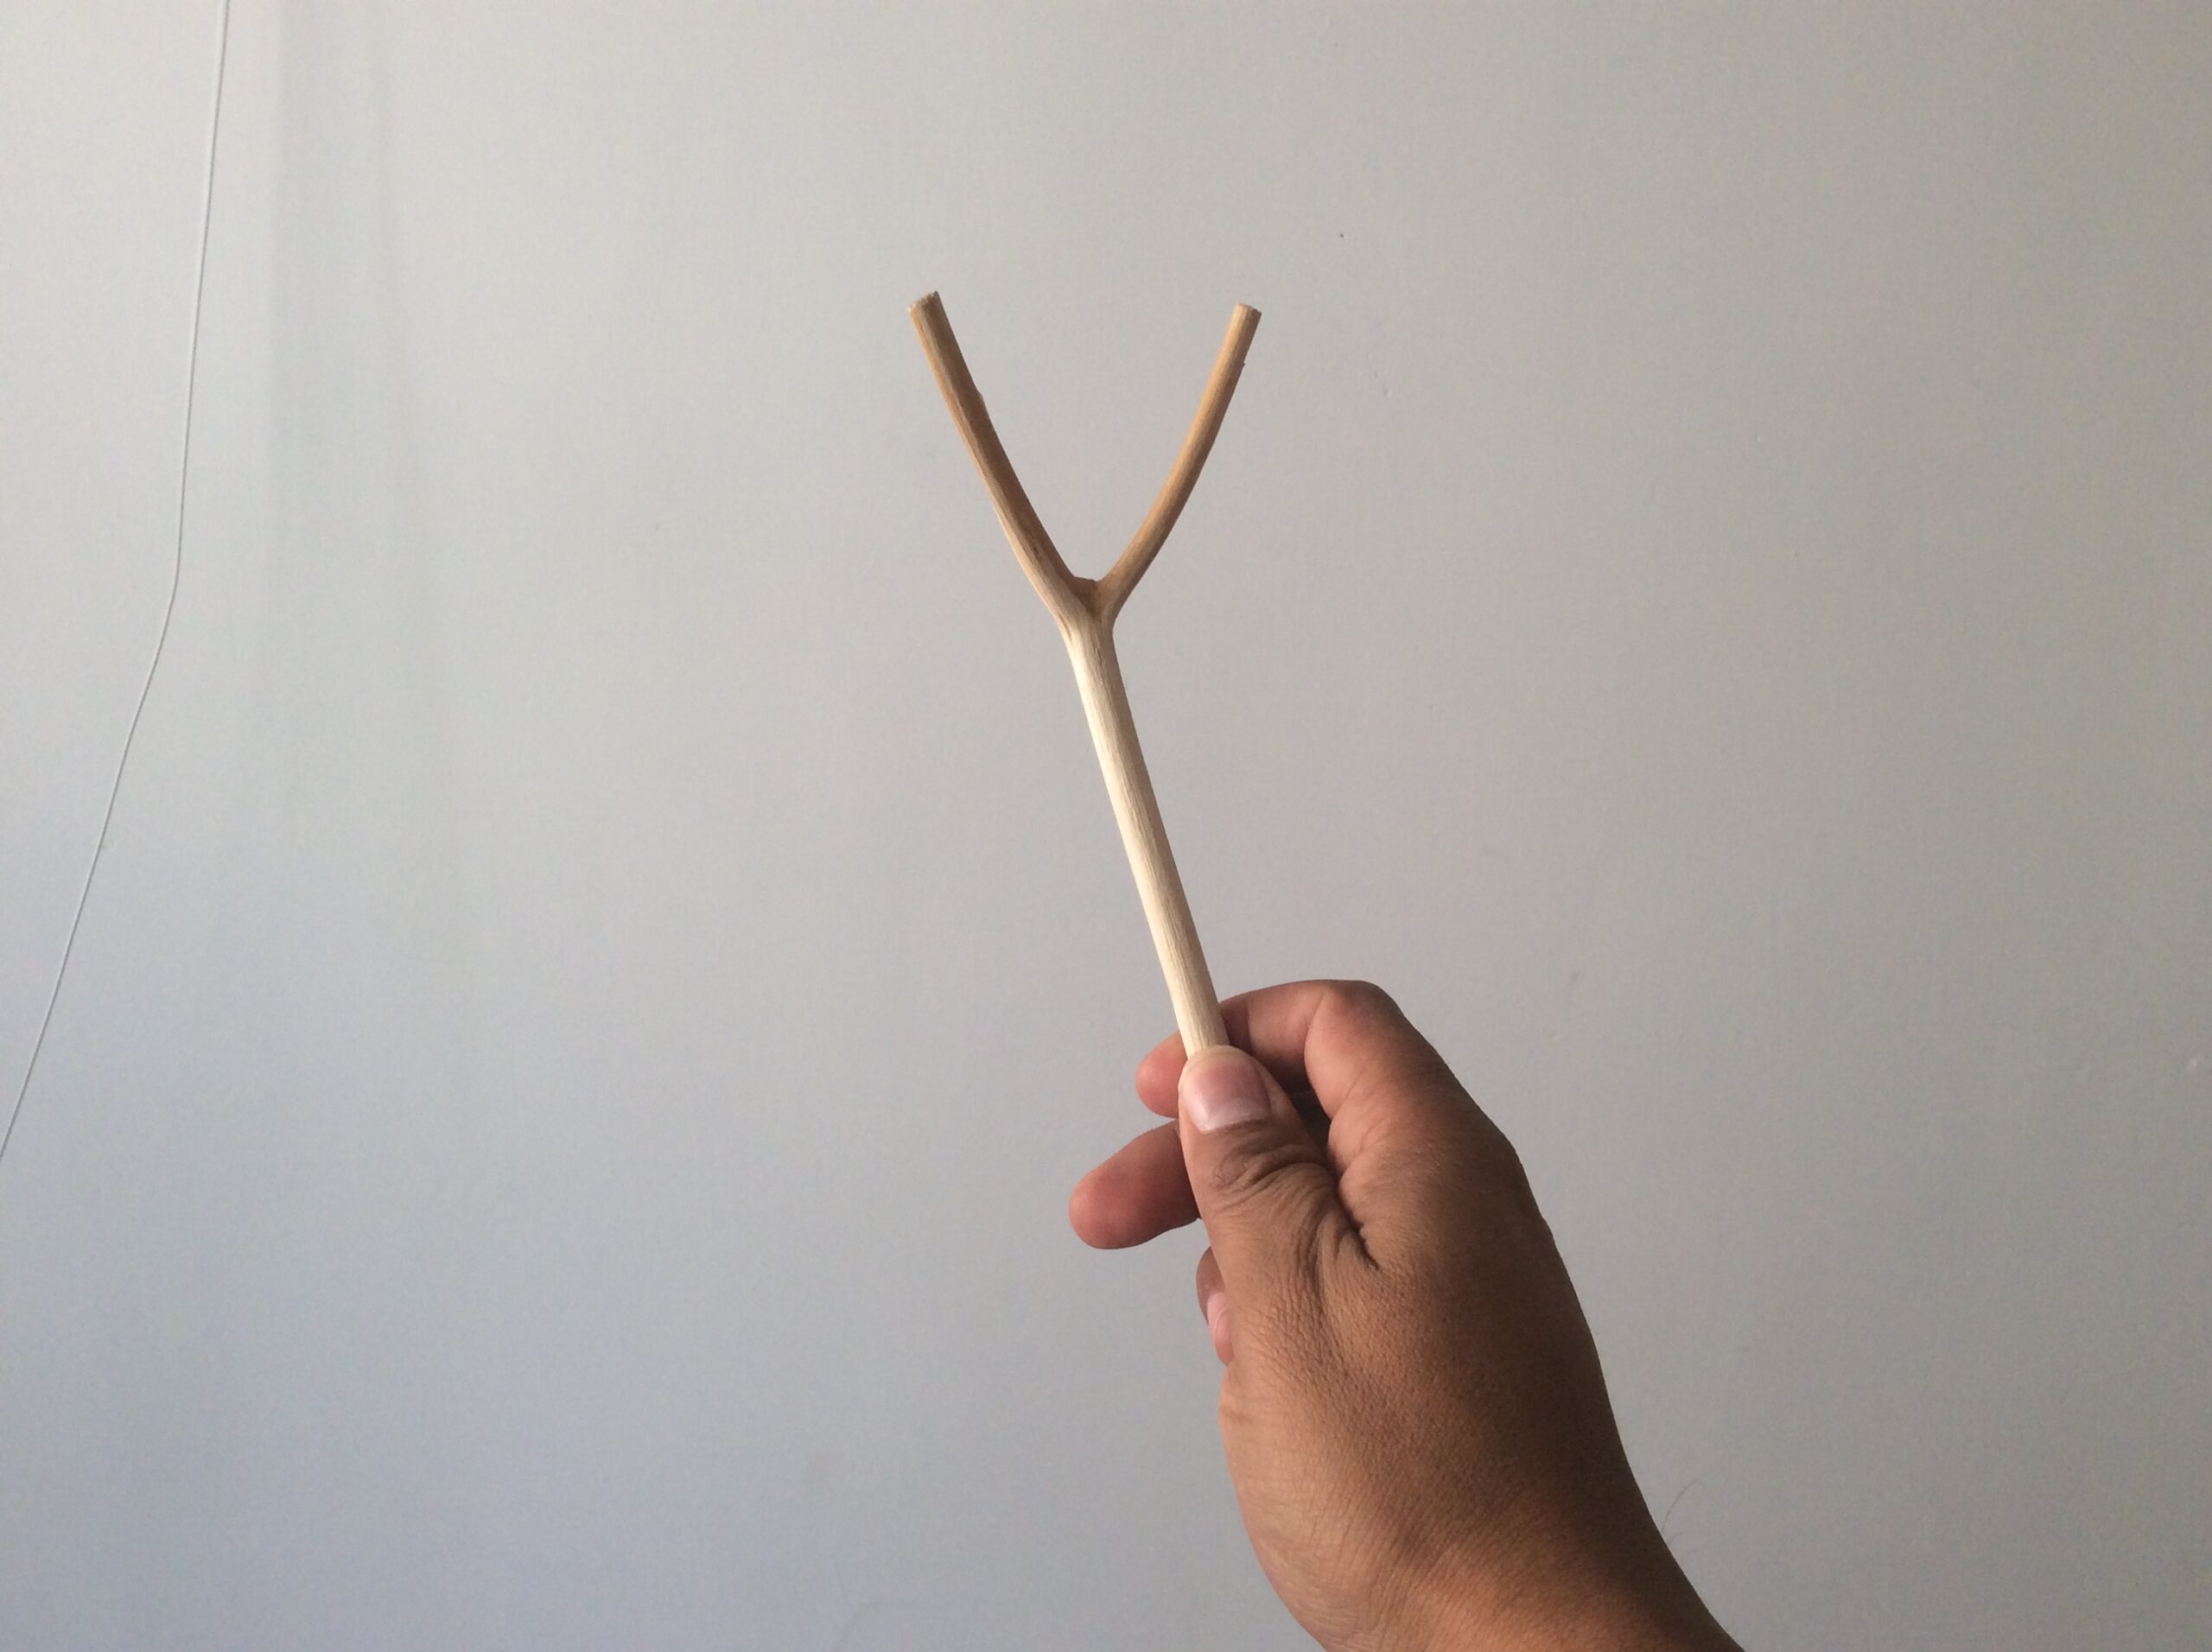 A hand holds a branch of light wood against a blank background, the branch diverges into two branches, like a wishbone.